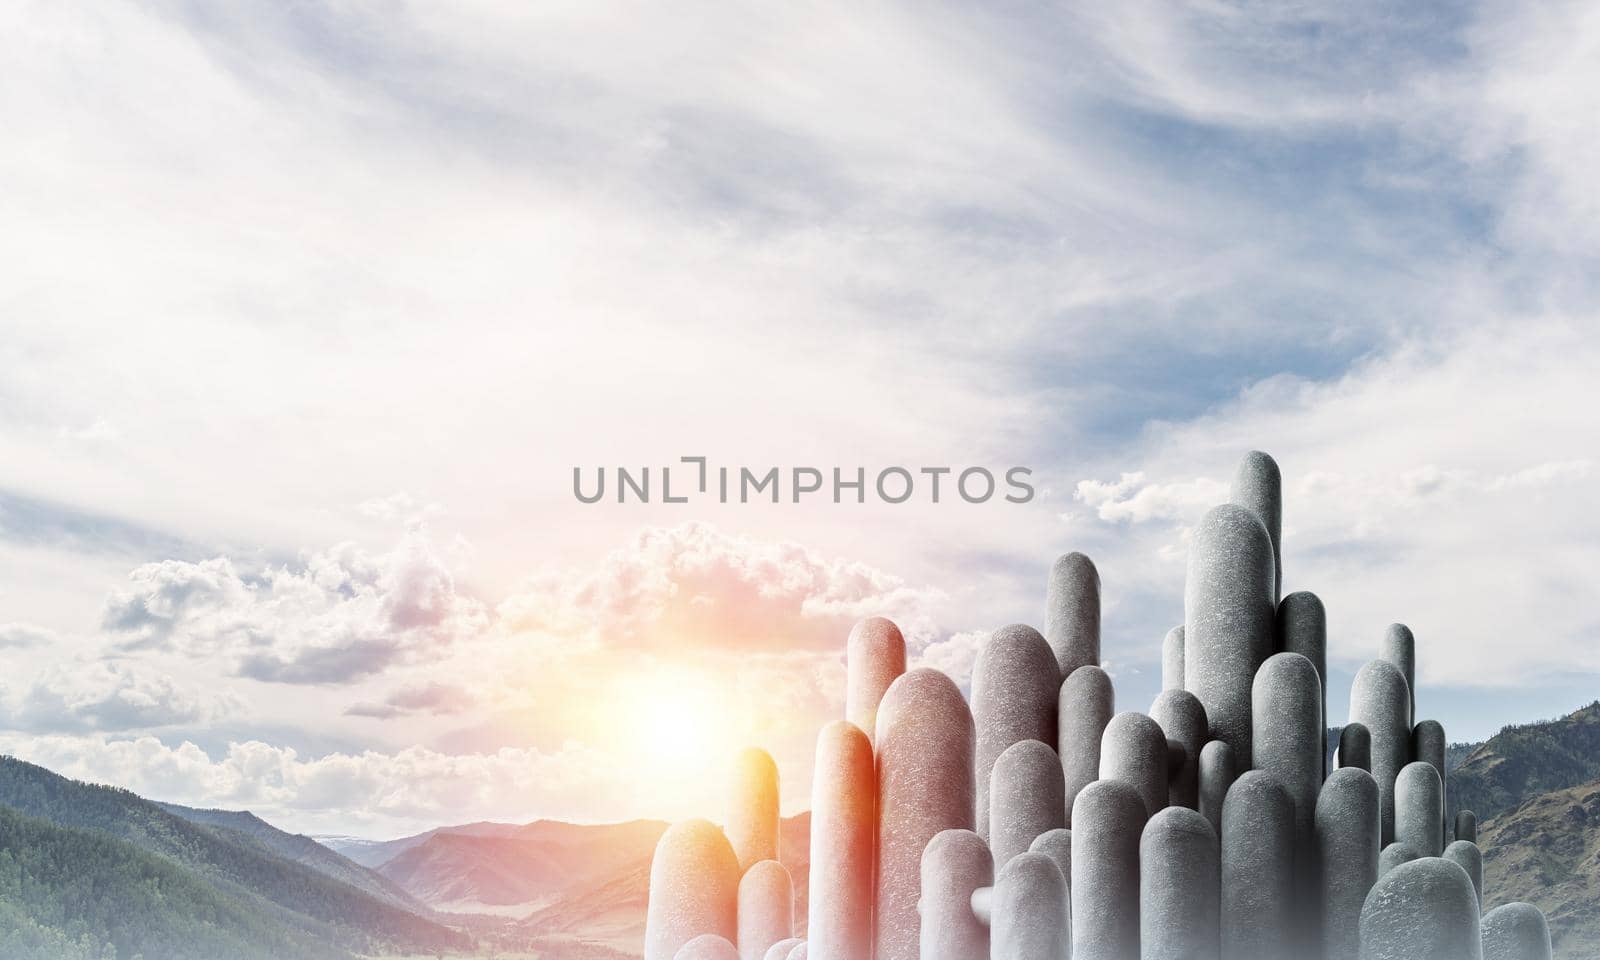 Image of high and huge stone columns located outdoors with beautiful landscape on background. Wallpaper, backdrop with copyspace.